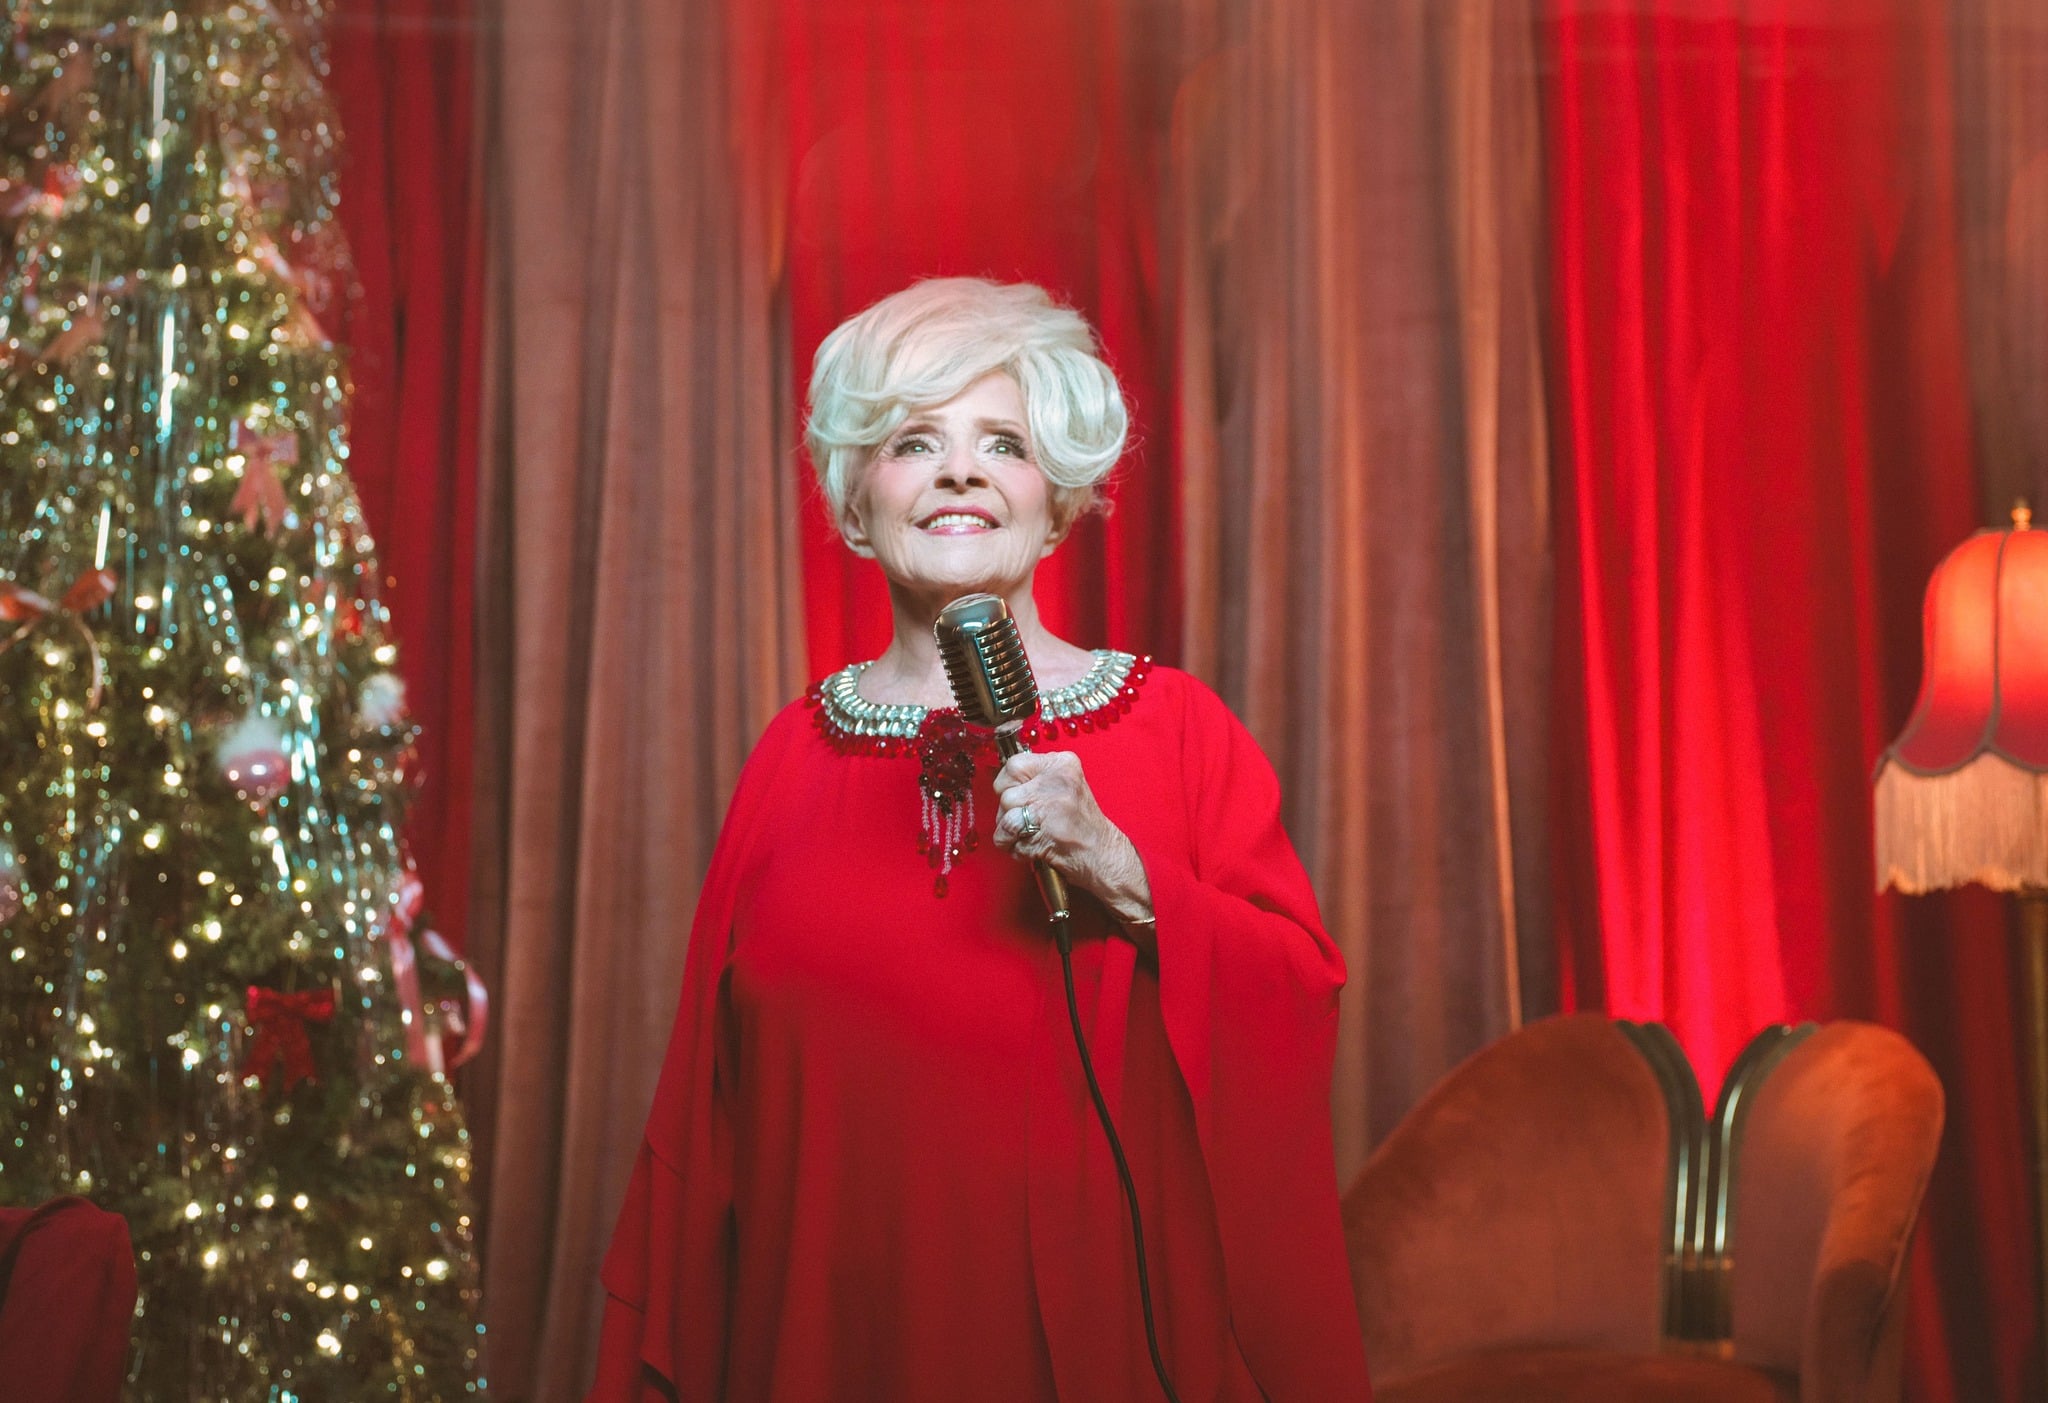 Brenda Lee in her new video for "Rockin' Around the Christmas Tree"